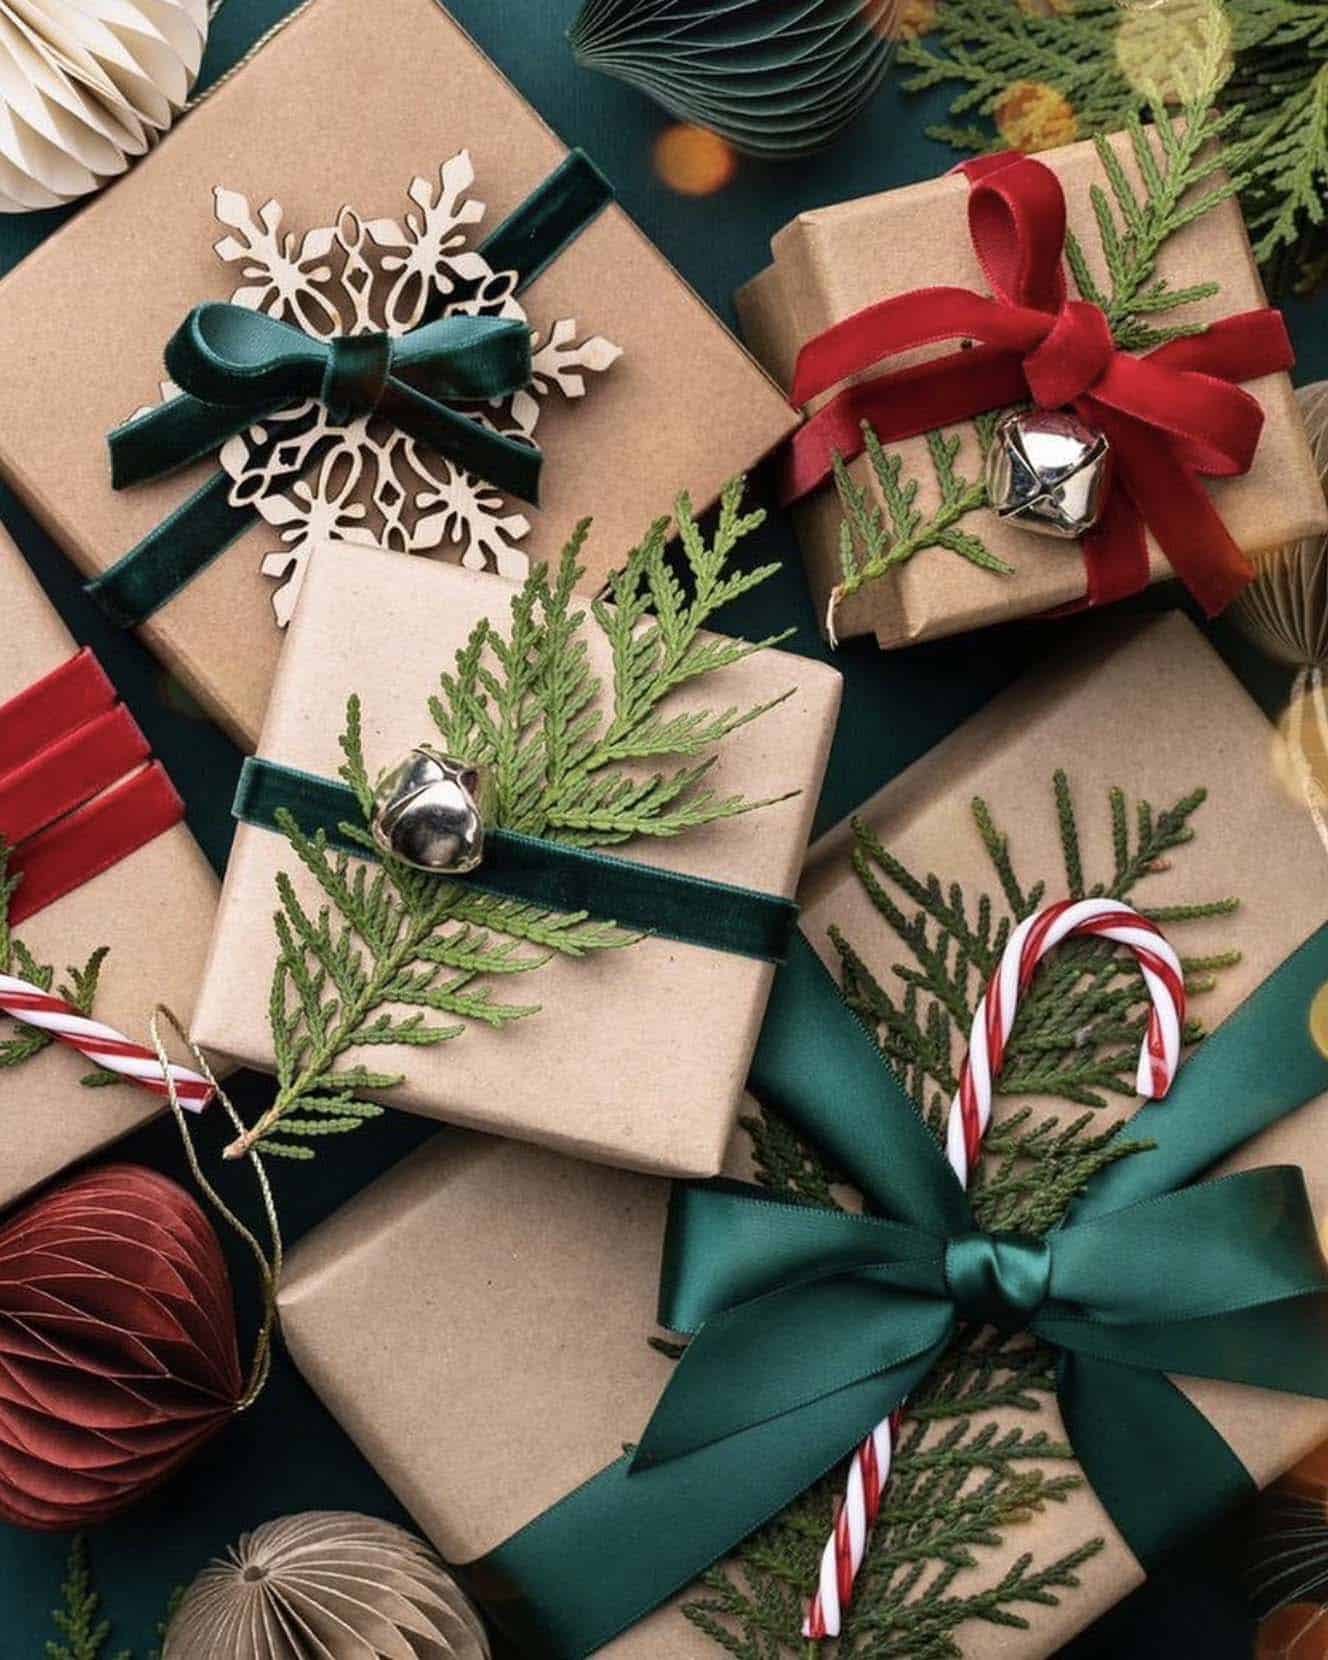 christmas gifts with silver bells, pine branches, ribbon and candy canes